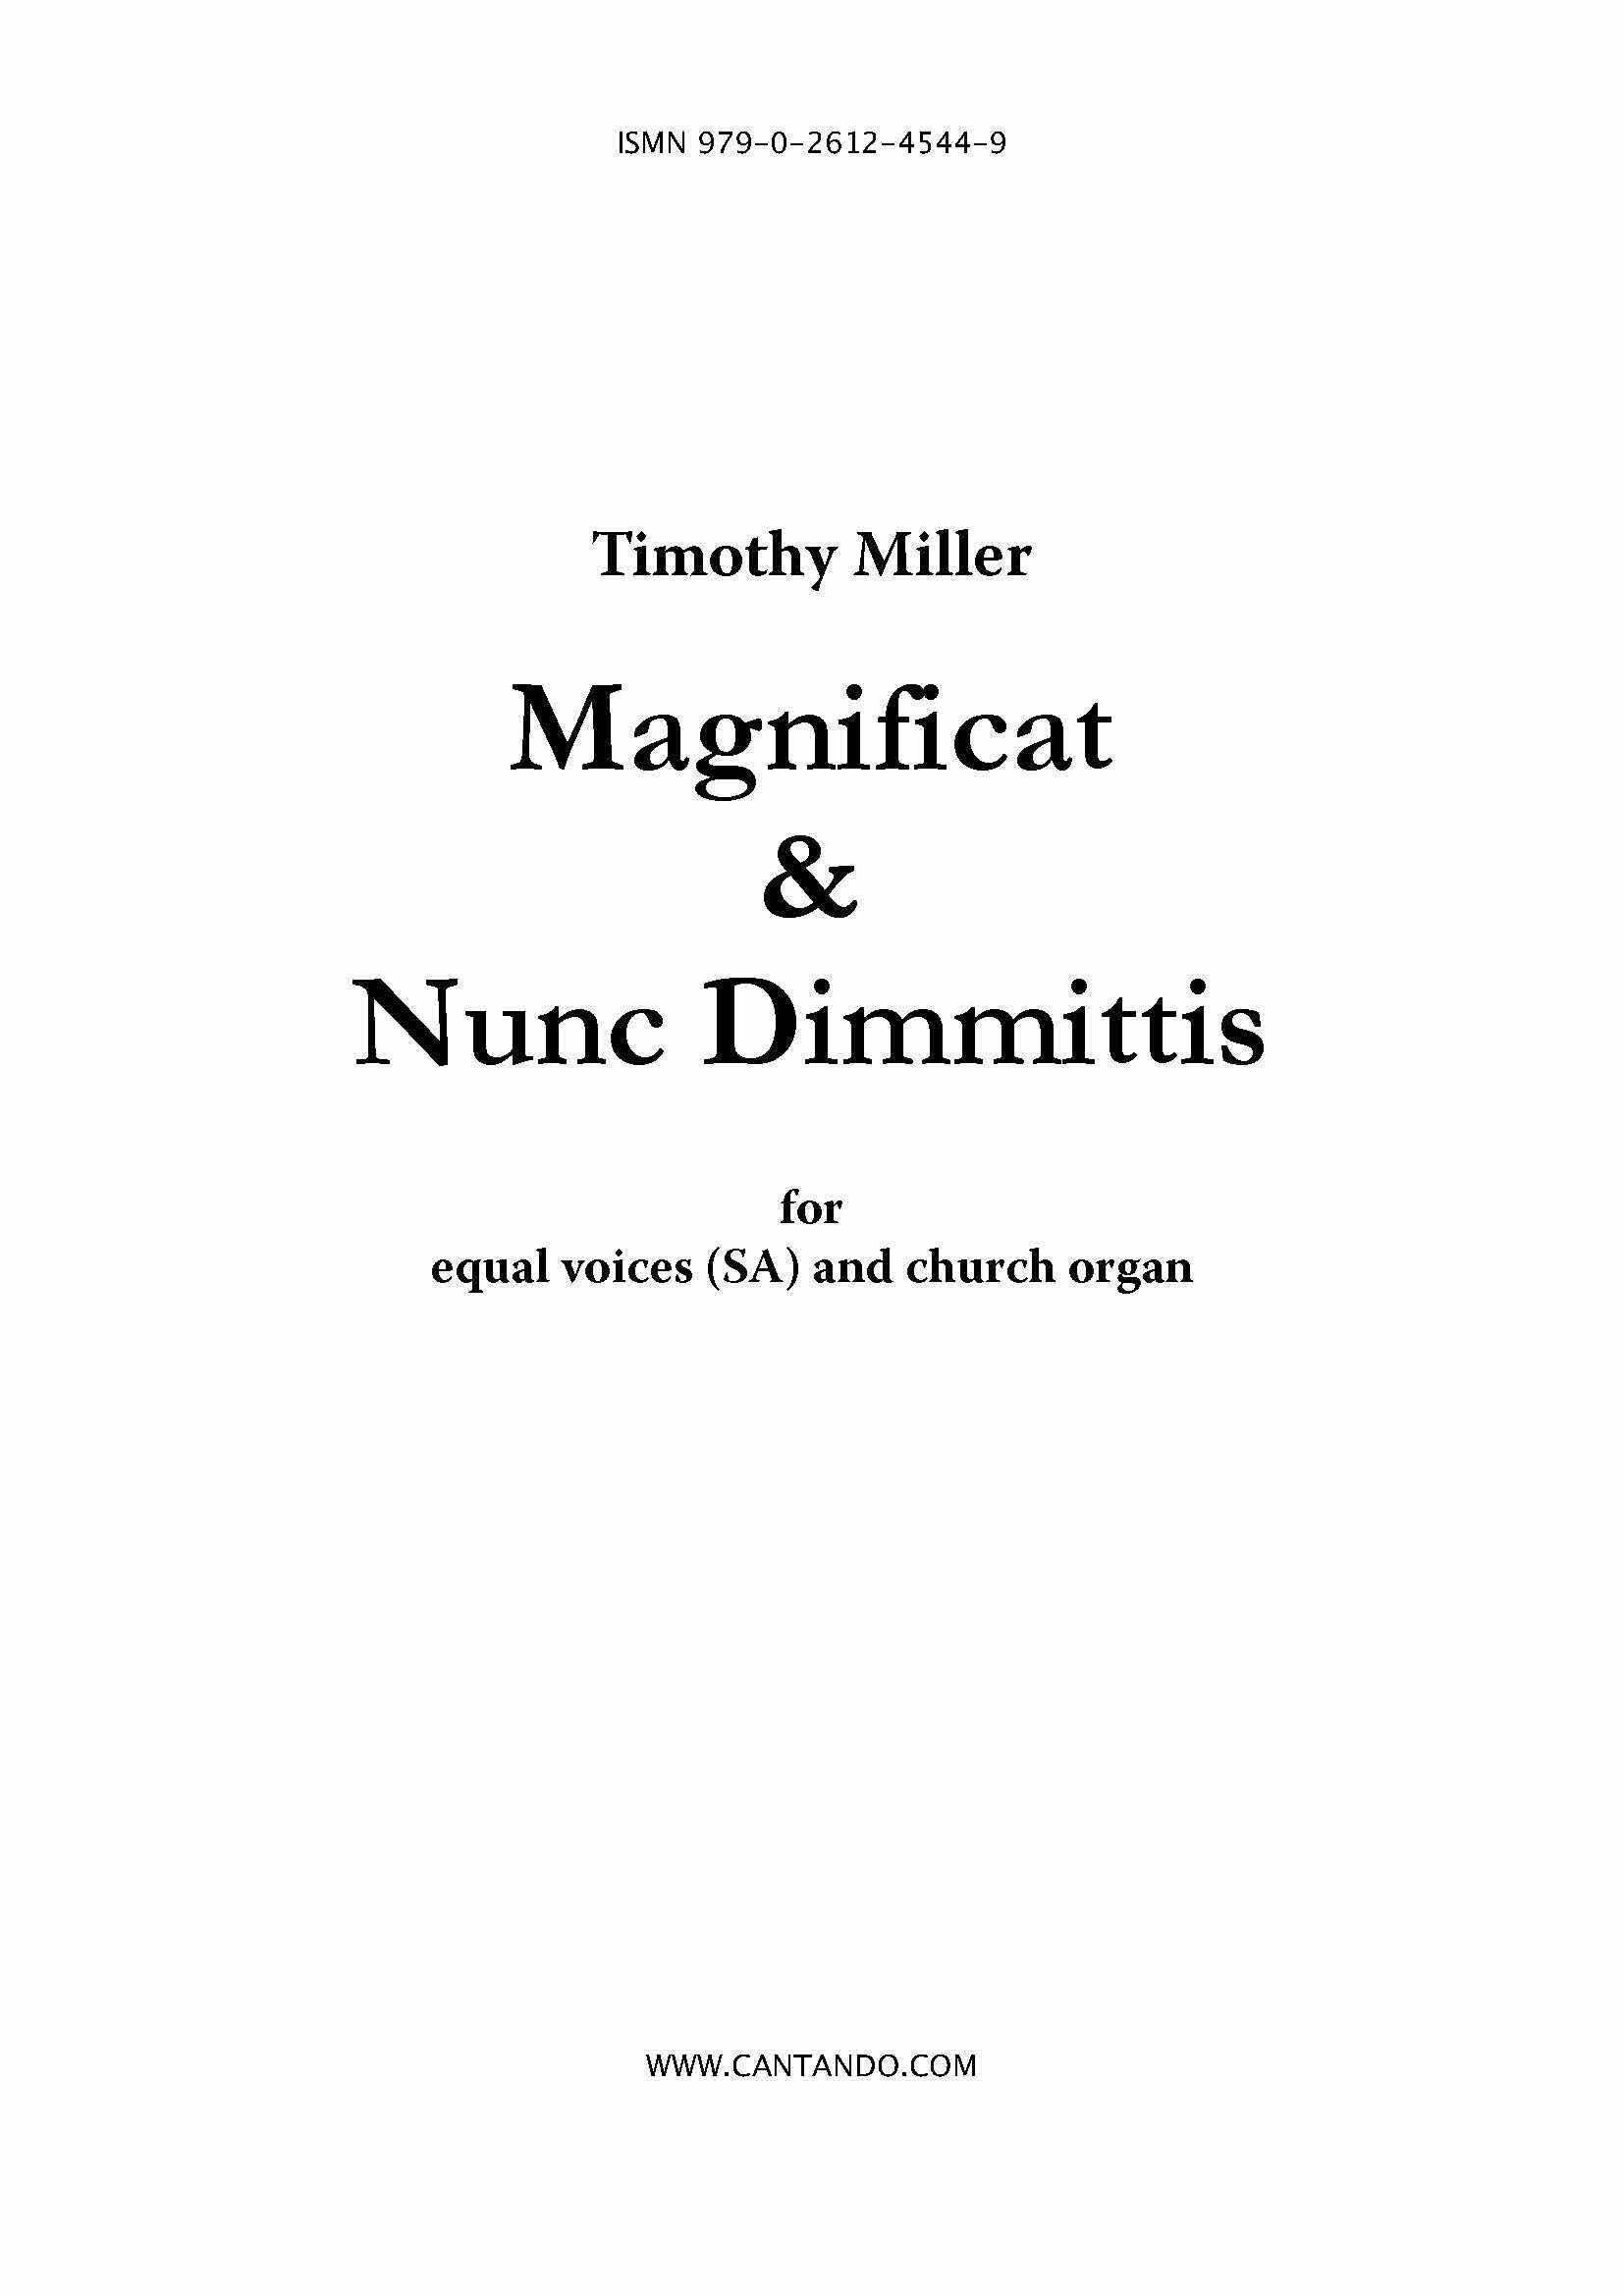 Magnificat&Nunc Dimmittis - for equal voices (SA) and church organ